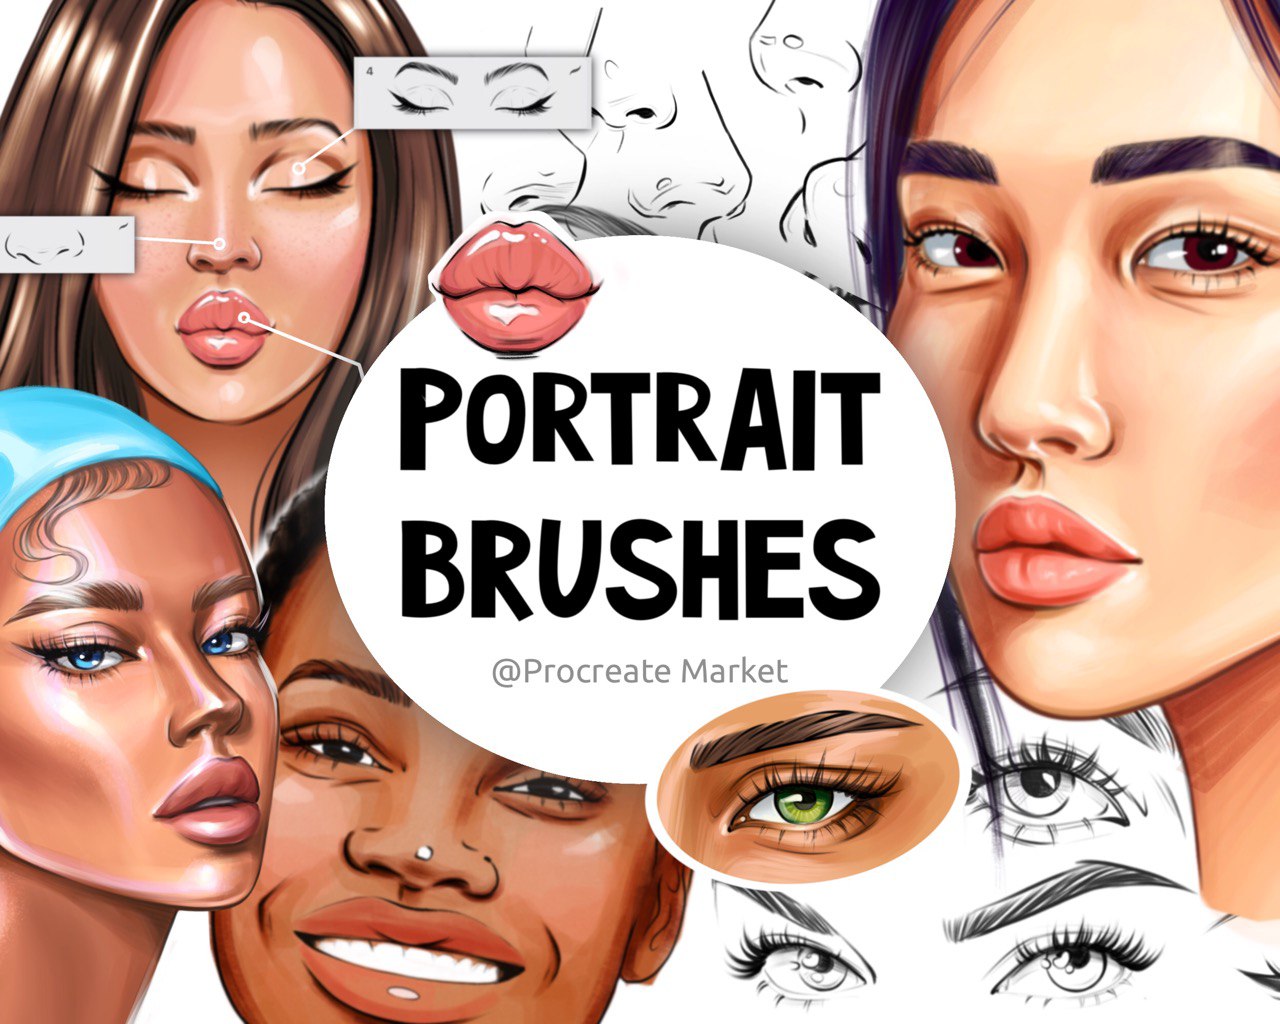 Procreate Brushes | Procreate download | Procreate stamps | paint brushes | Color palette | Procreate tattoo | Procreate brush | Procreate lettering | Procreate body | Procreate stamp | Brushes procreate | art from photo | How to draw | Procreate bundle |